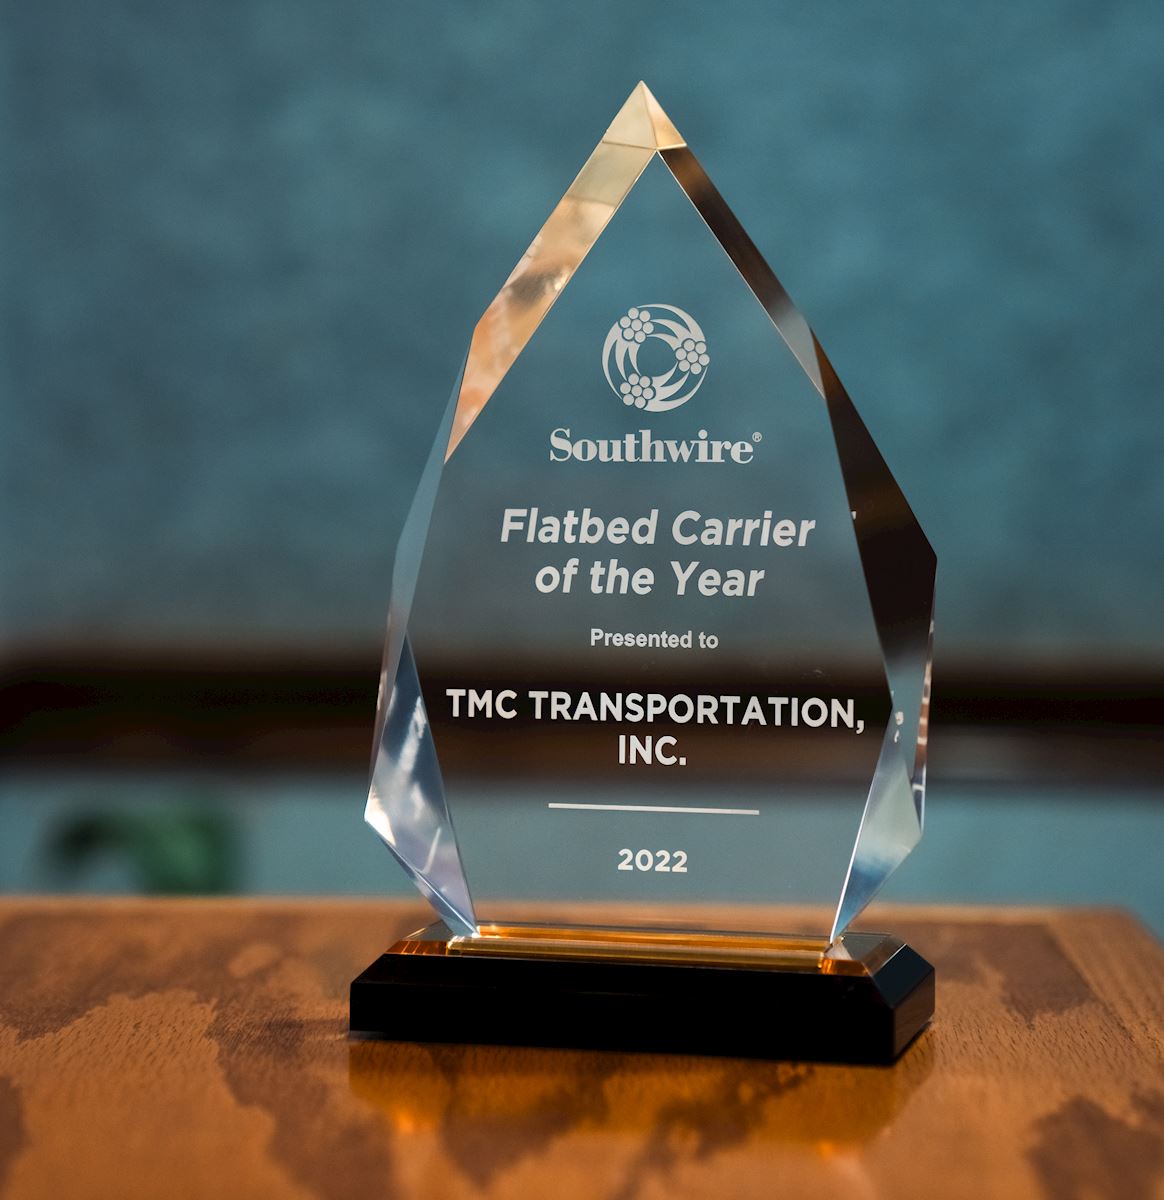 Southwire's Flatbed Carrier of the Year 2022 Award